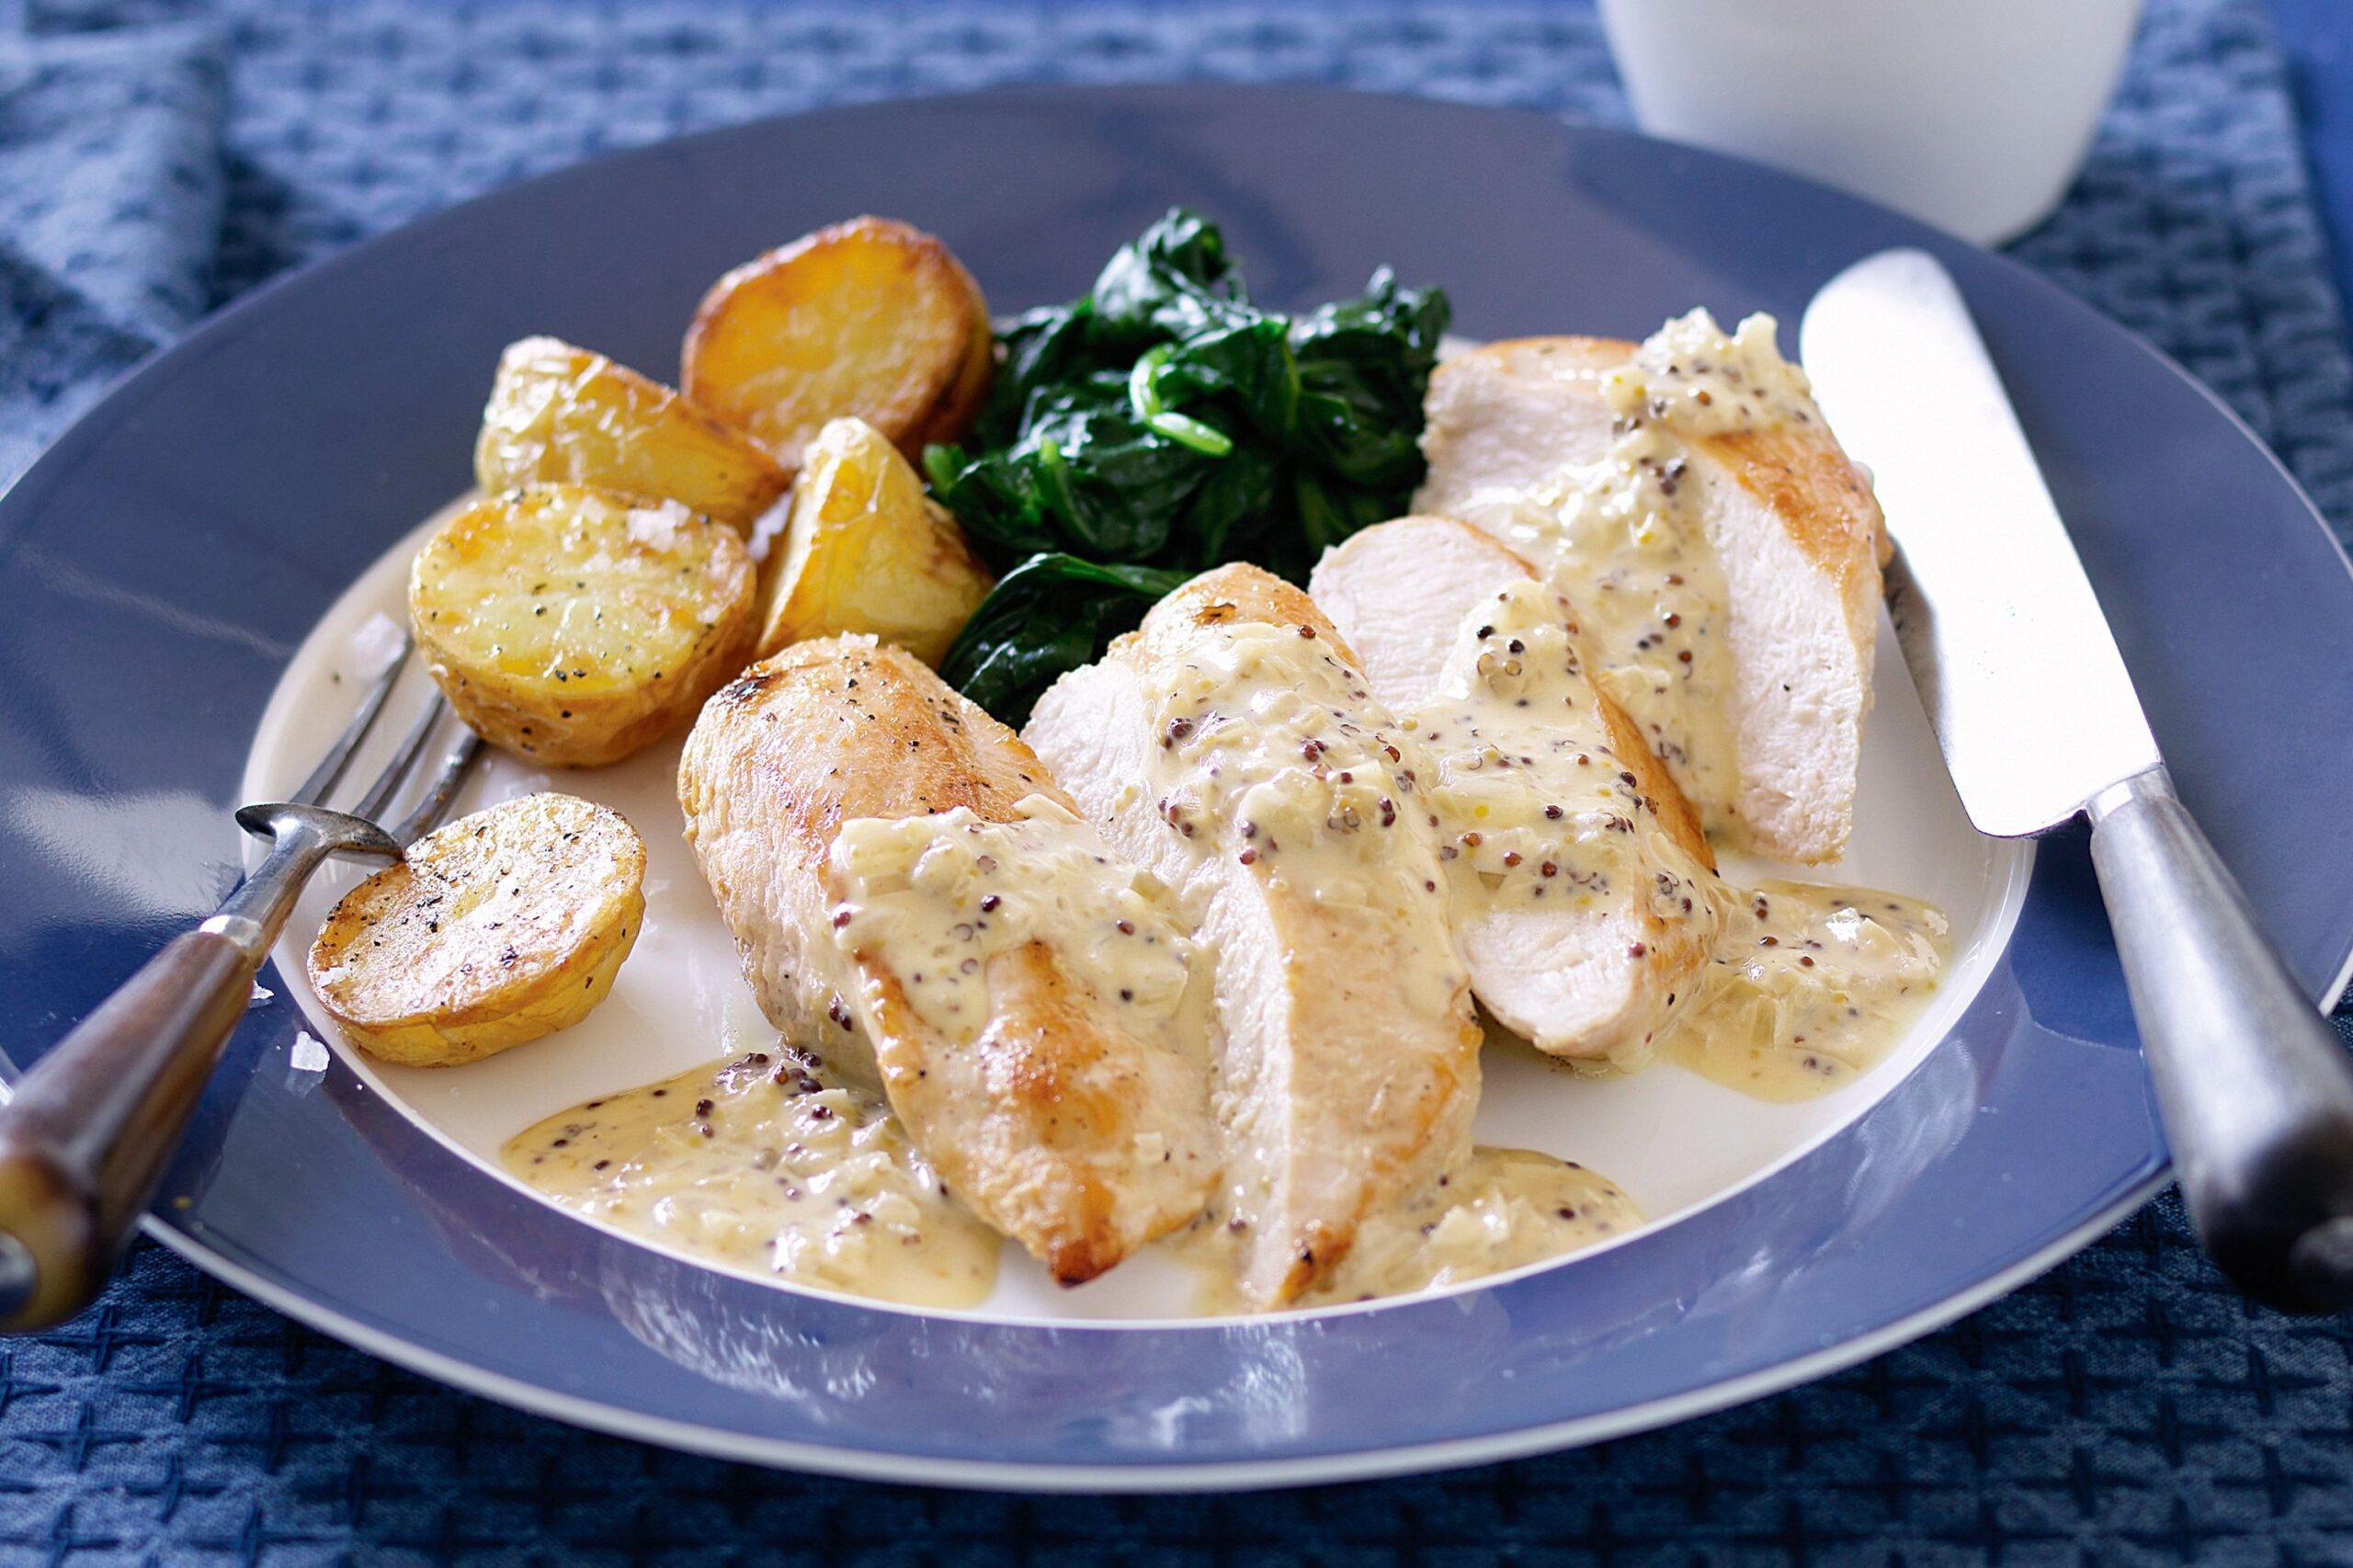  This sautéed chicken is the definition of comfort food.